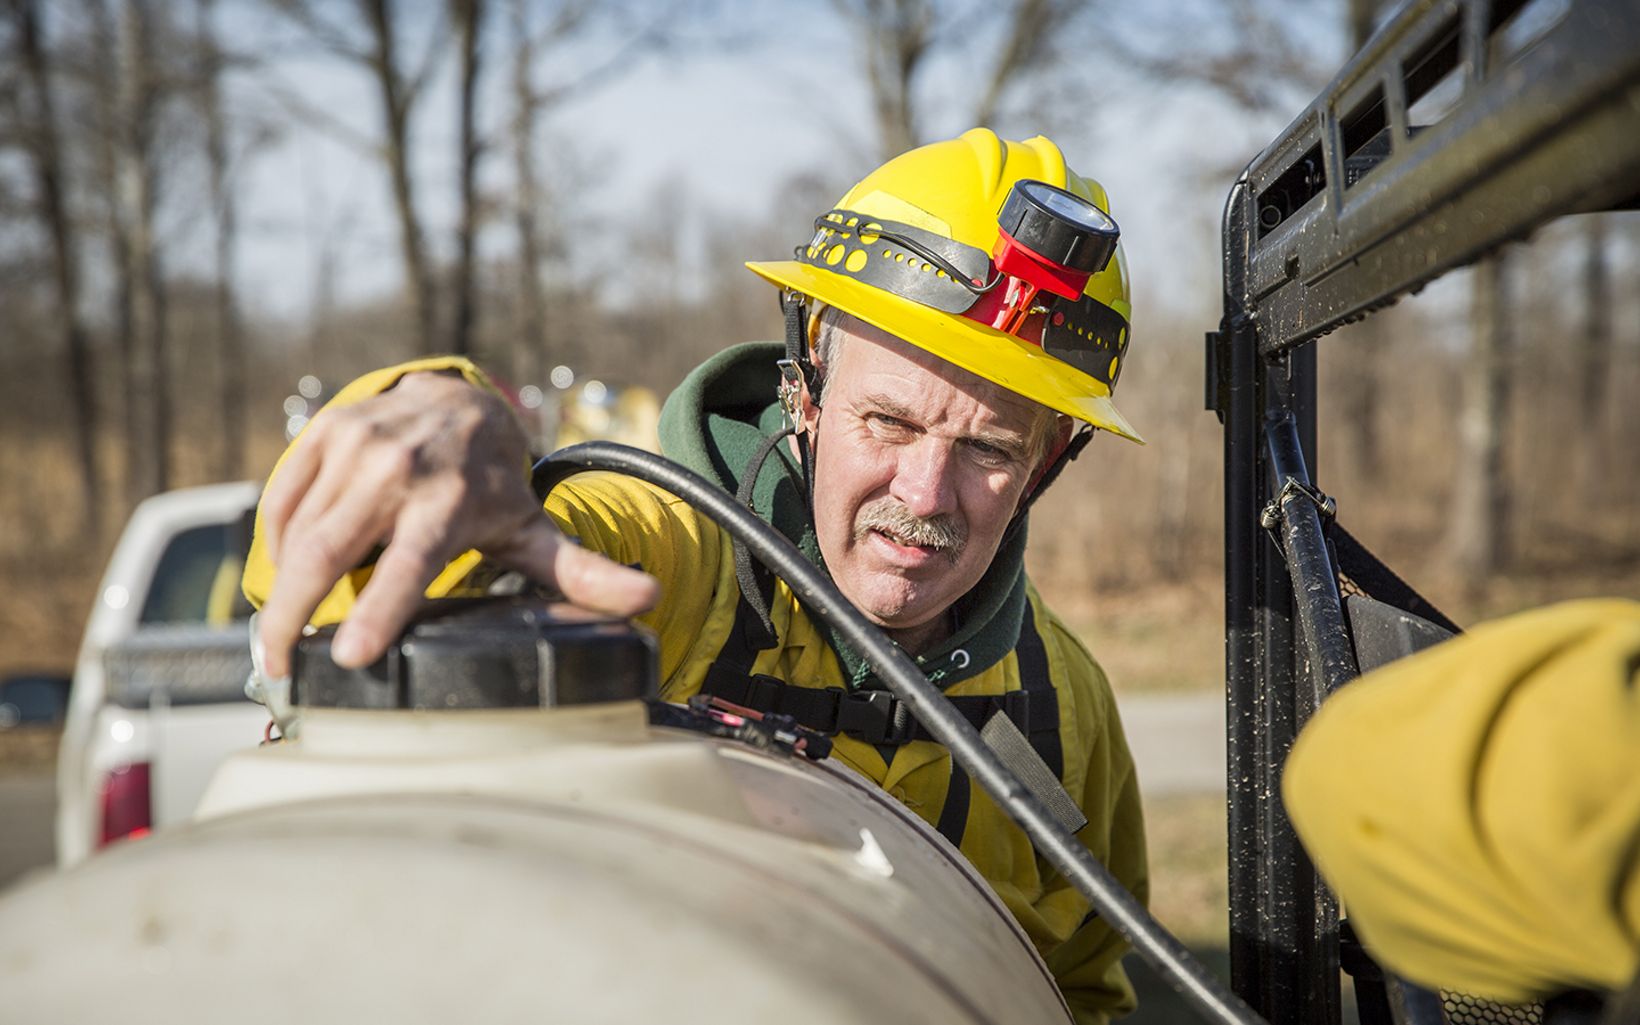 Prescribed Fire Checking a water tank before a prescribed fire in Kentucky. © Mike Wilkinson